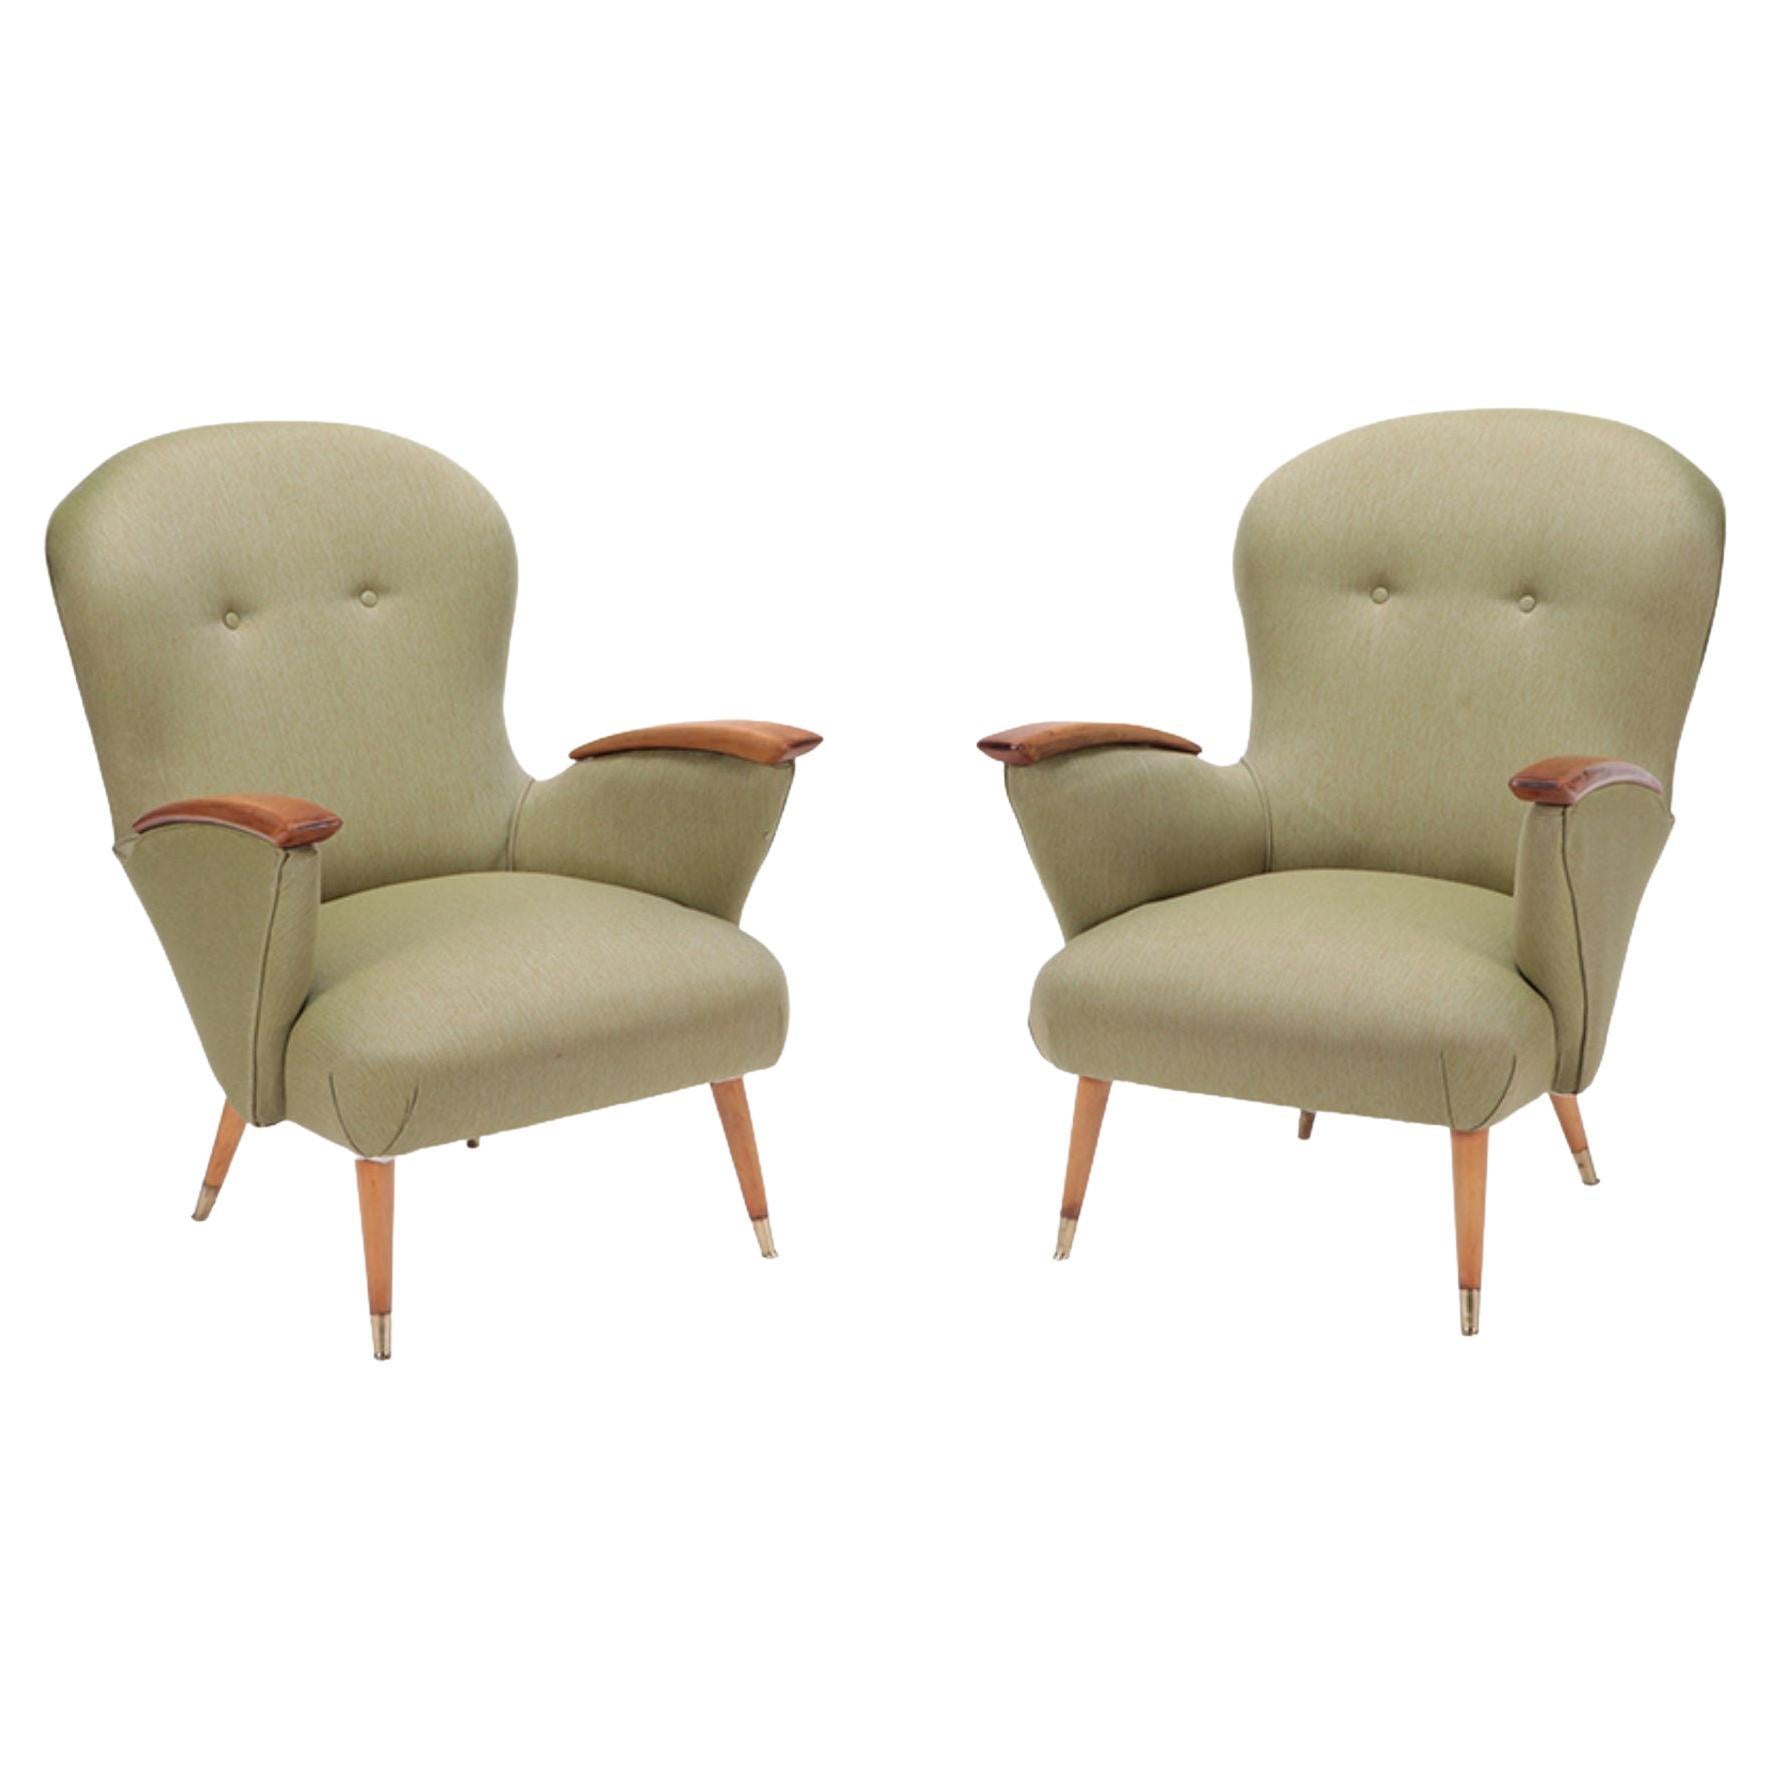 Pair of Restored Danish Armchairs with Rolled Arms, circa 1950 For Sale